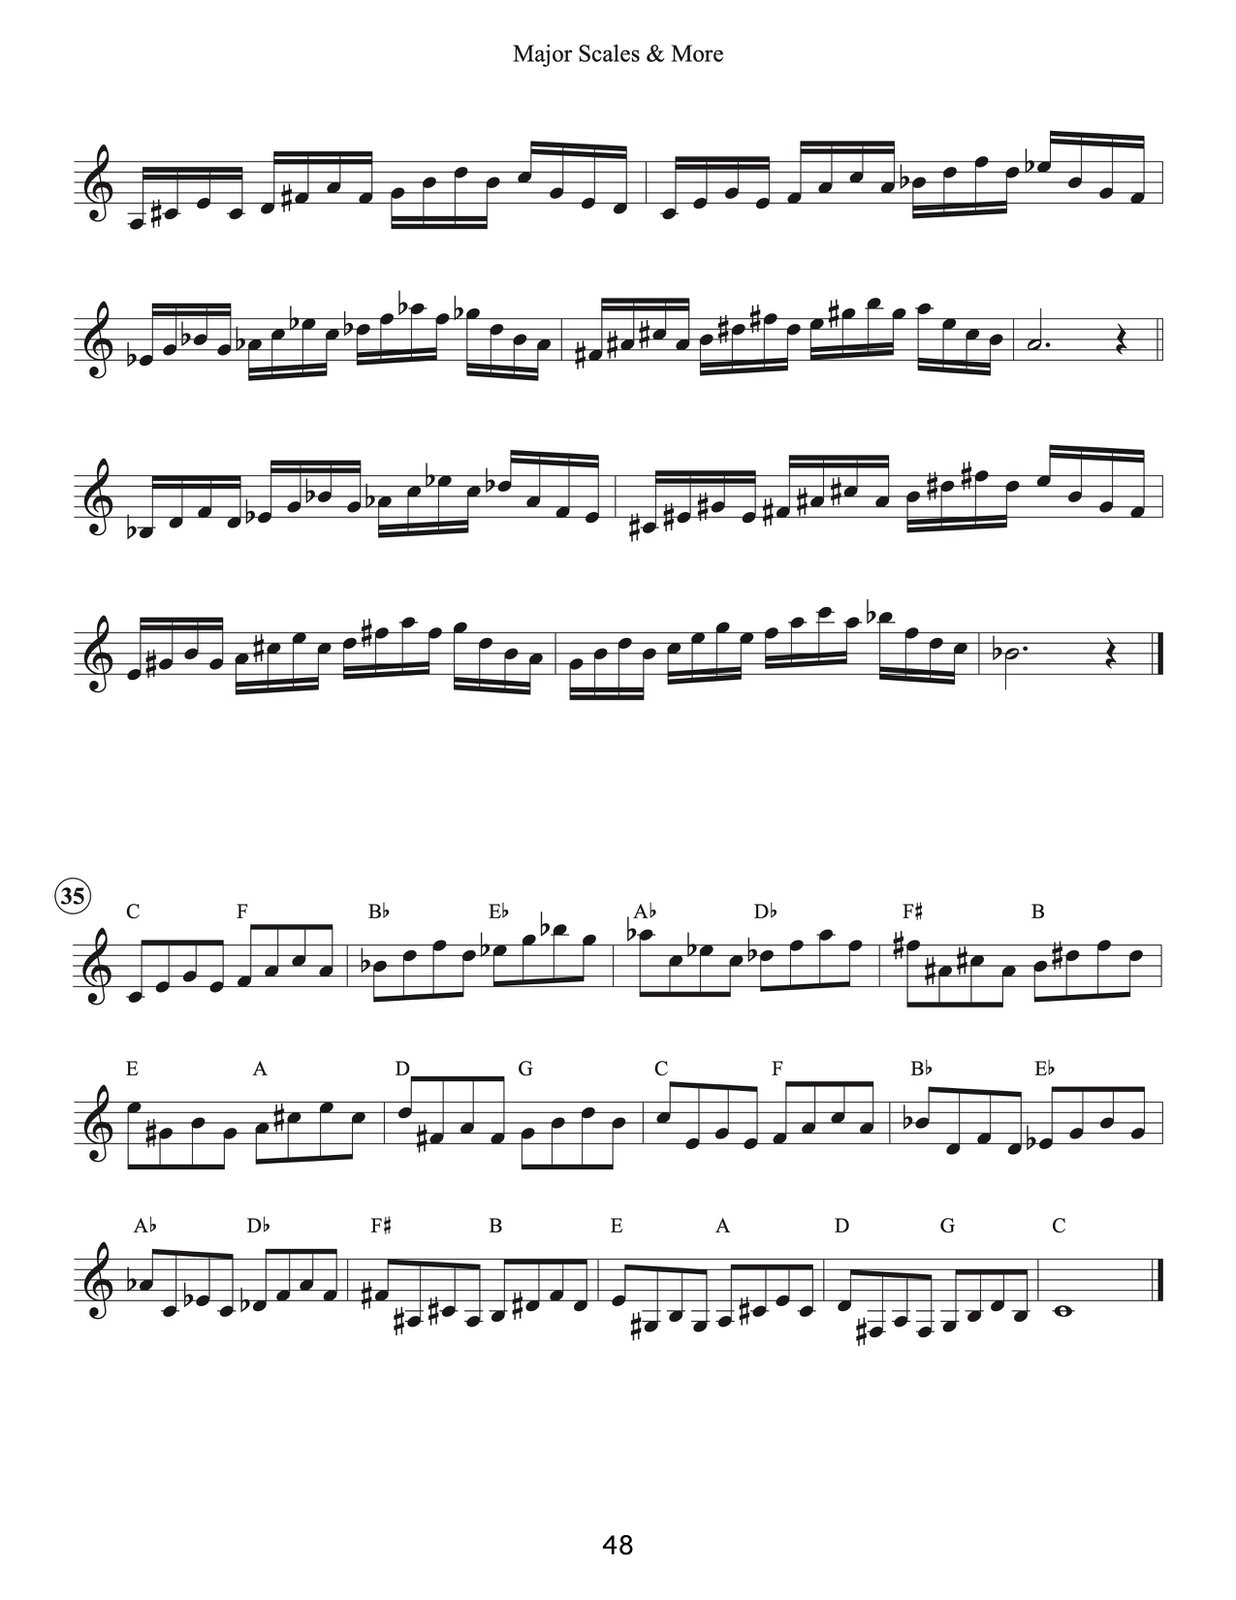 Your Daily Major Scales (& More) by Veldkamp, Erik - qPress